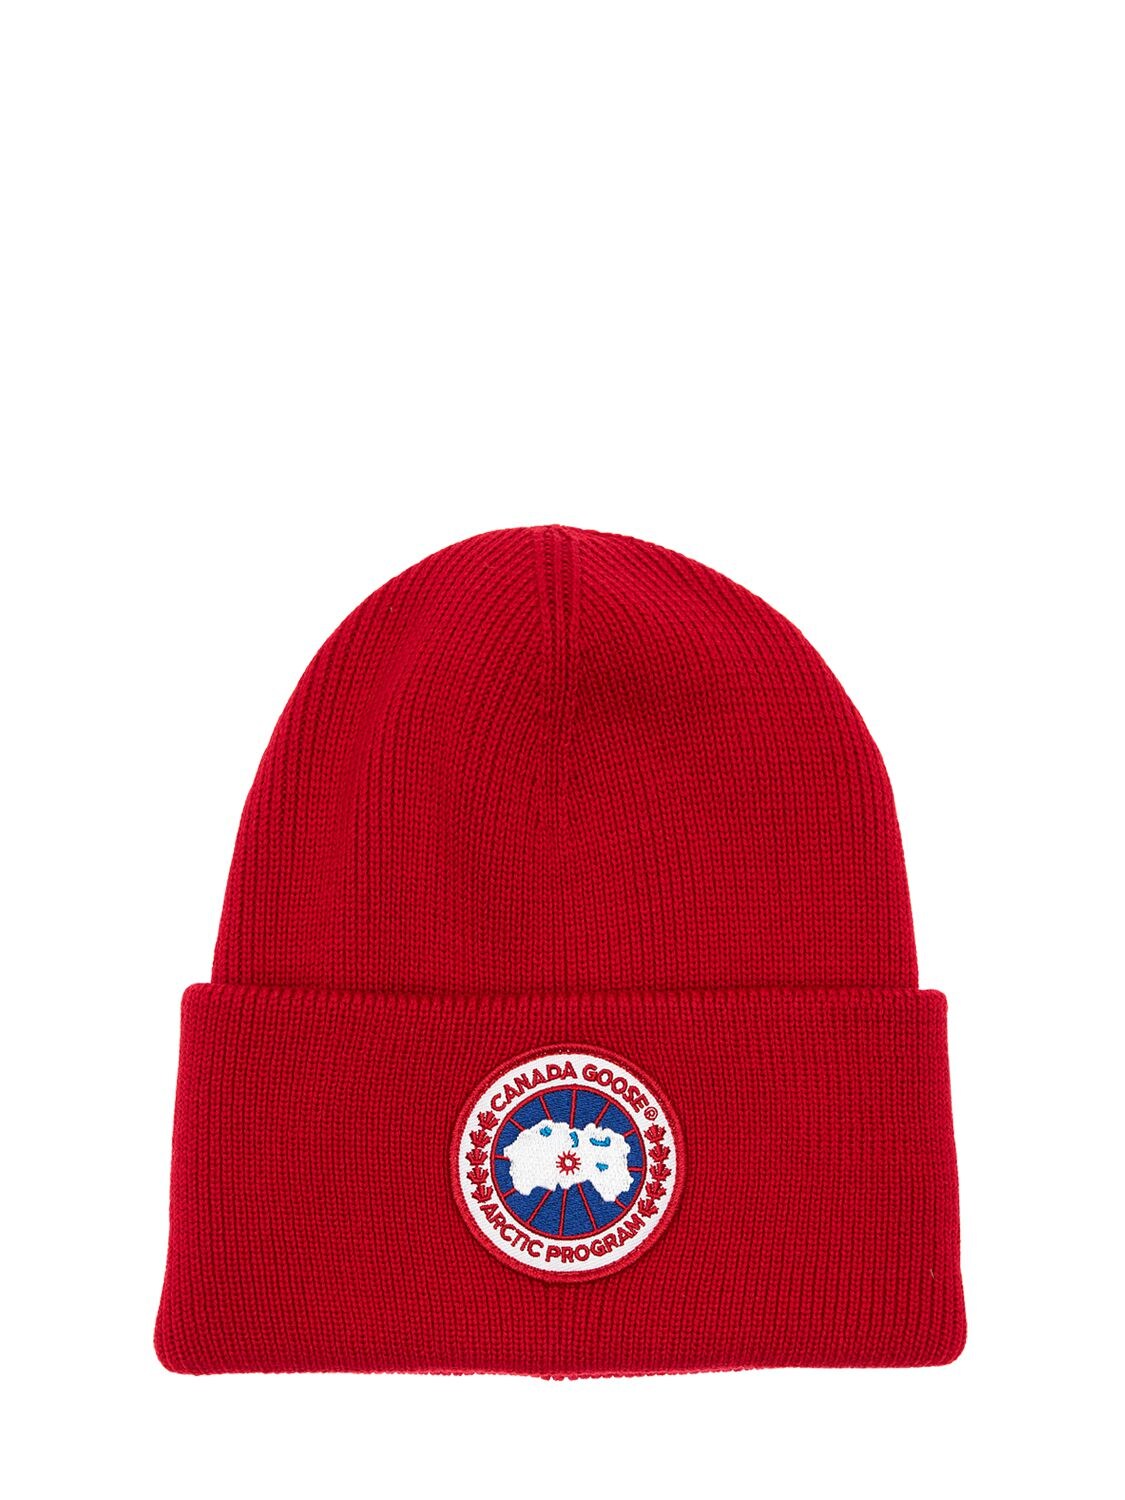 Canada Goose Arctic Disc Toque Wool Knit Beanie Hat In Red